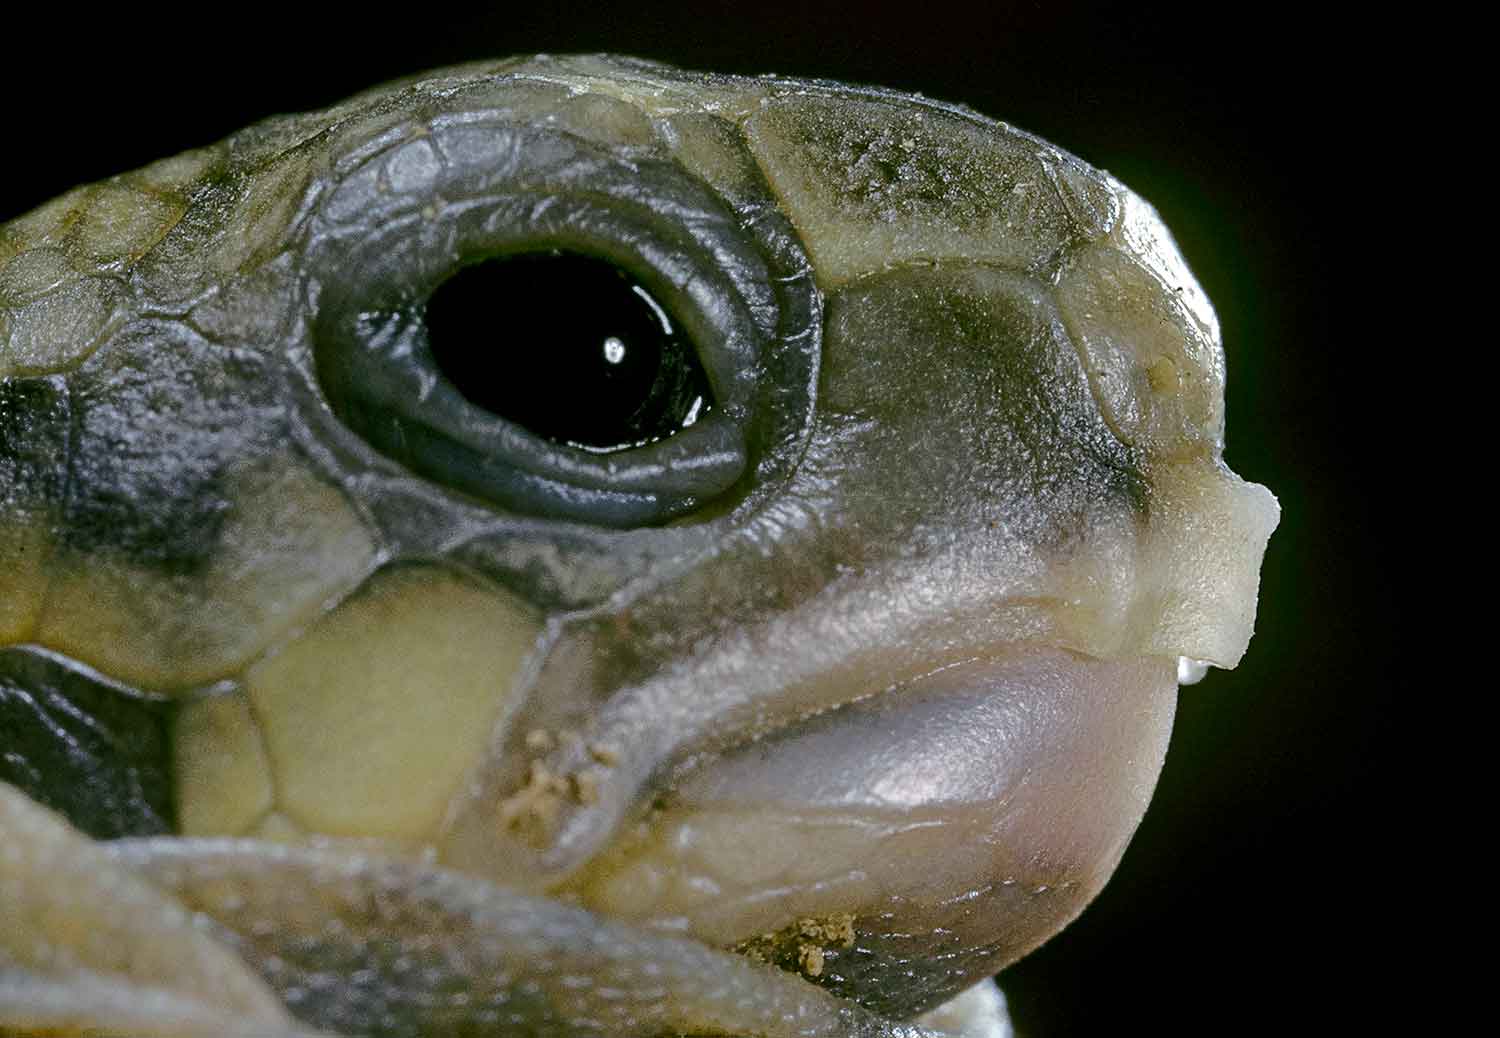 Closeup of a tortoise head with egg tooth